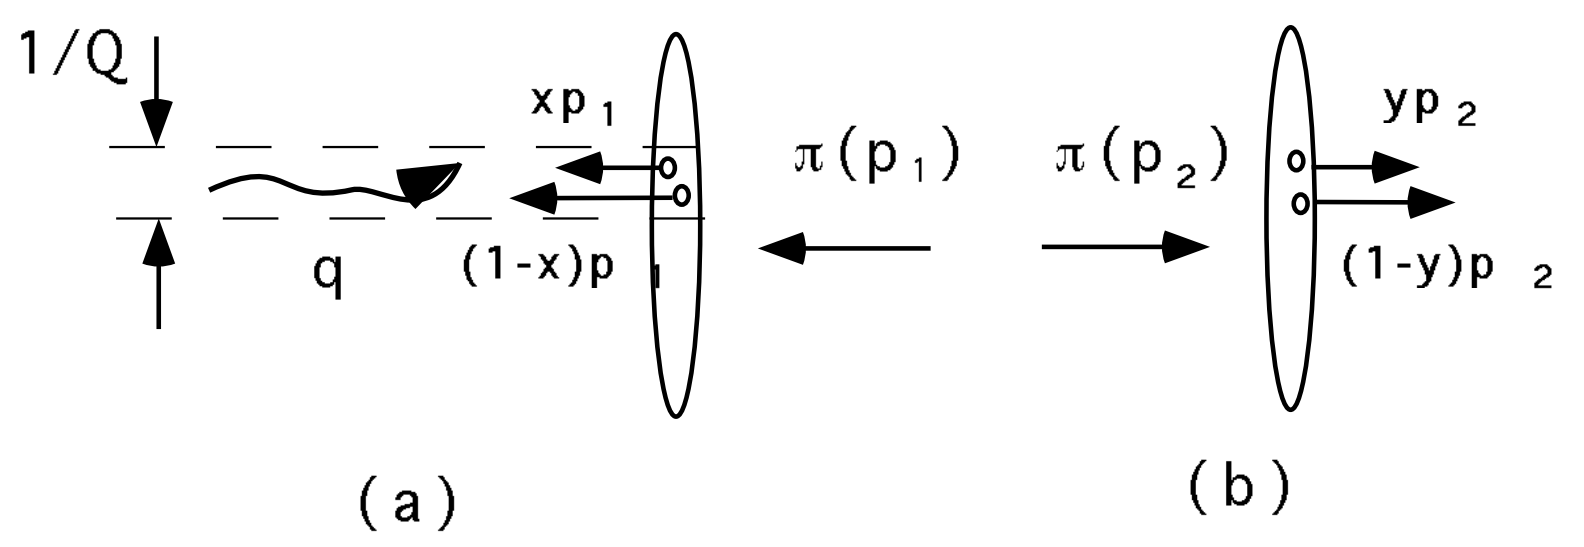 The valence quark state of a pion interacting with an external current carrying momentum $\mathcal{Q}$. The valence couple must be localized in $1/\mathcal{Q}$ in the transverse direction while in the longitudinal one Lorentz contraction assures the partons to be close. The picture is taken from \cite{Sterman:1997sx}.